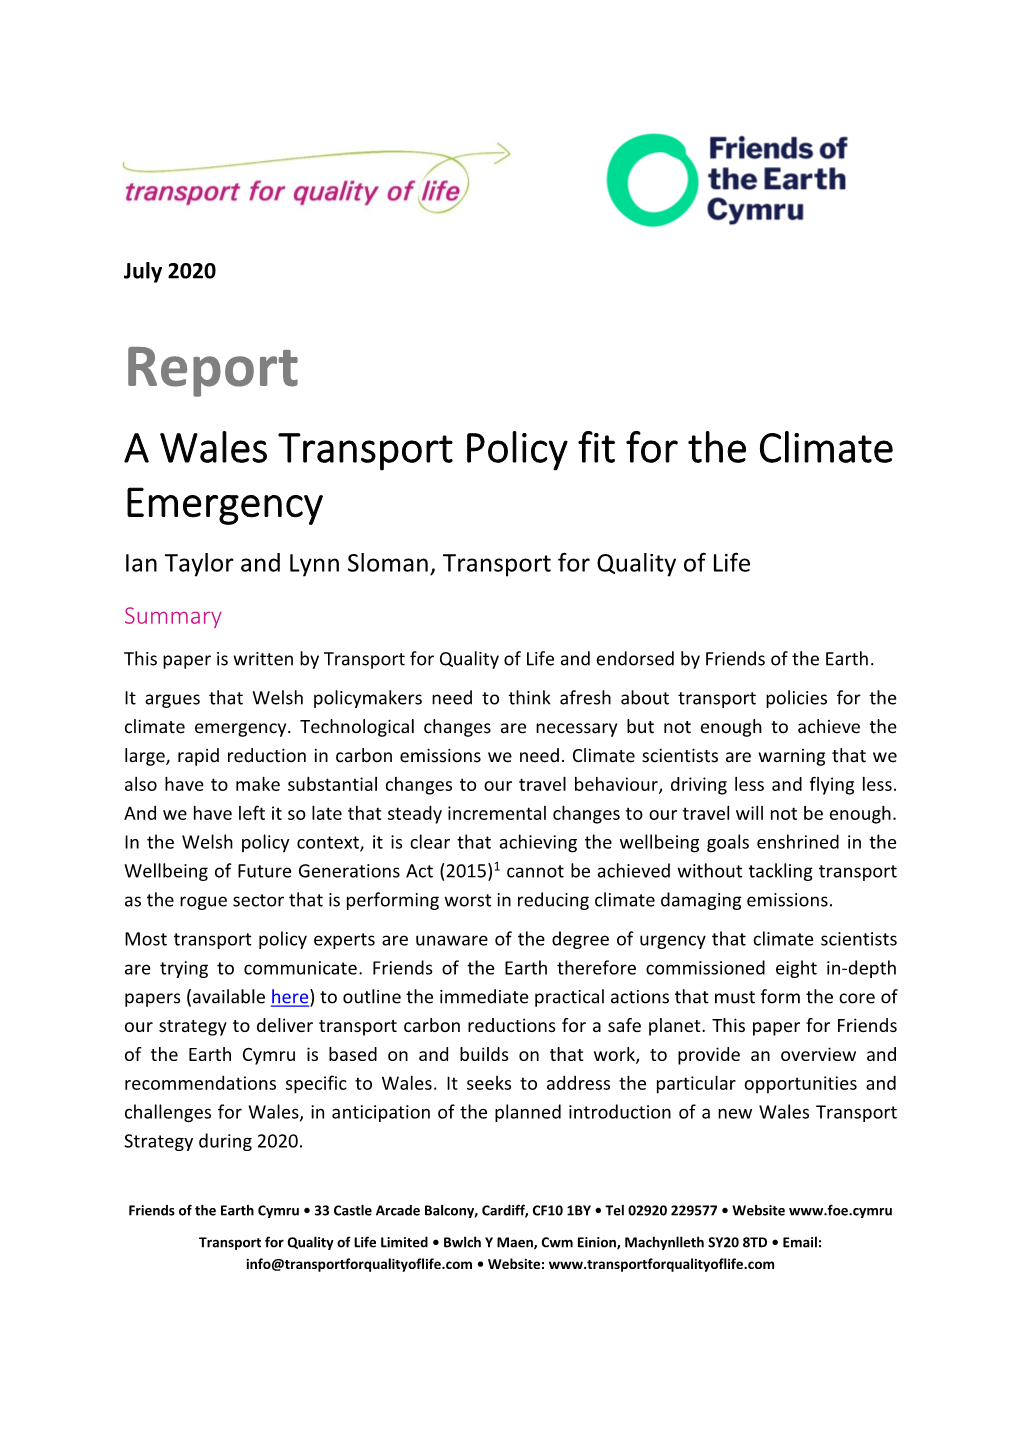 Report: a Wales Transport Policy Fit for the Climate Emergency